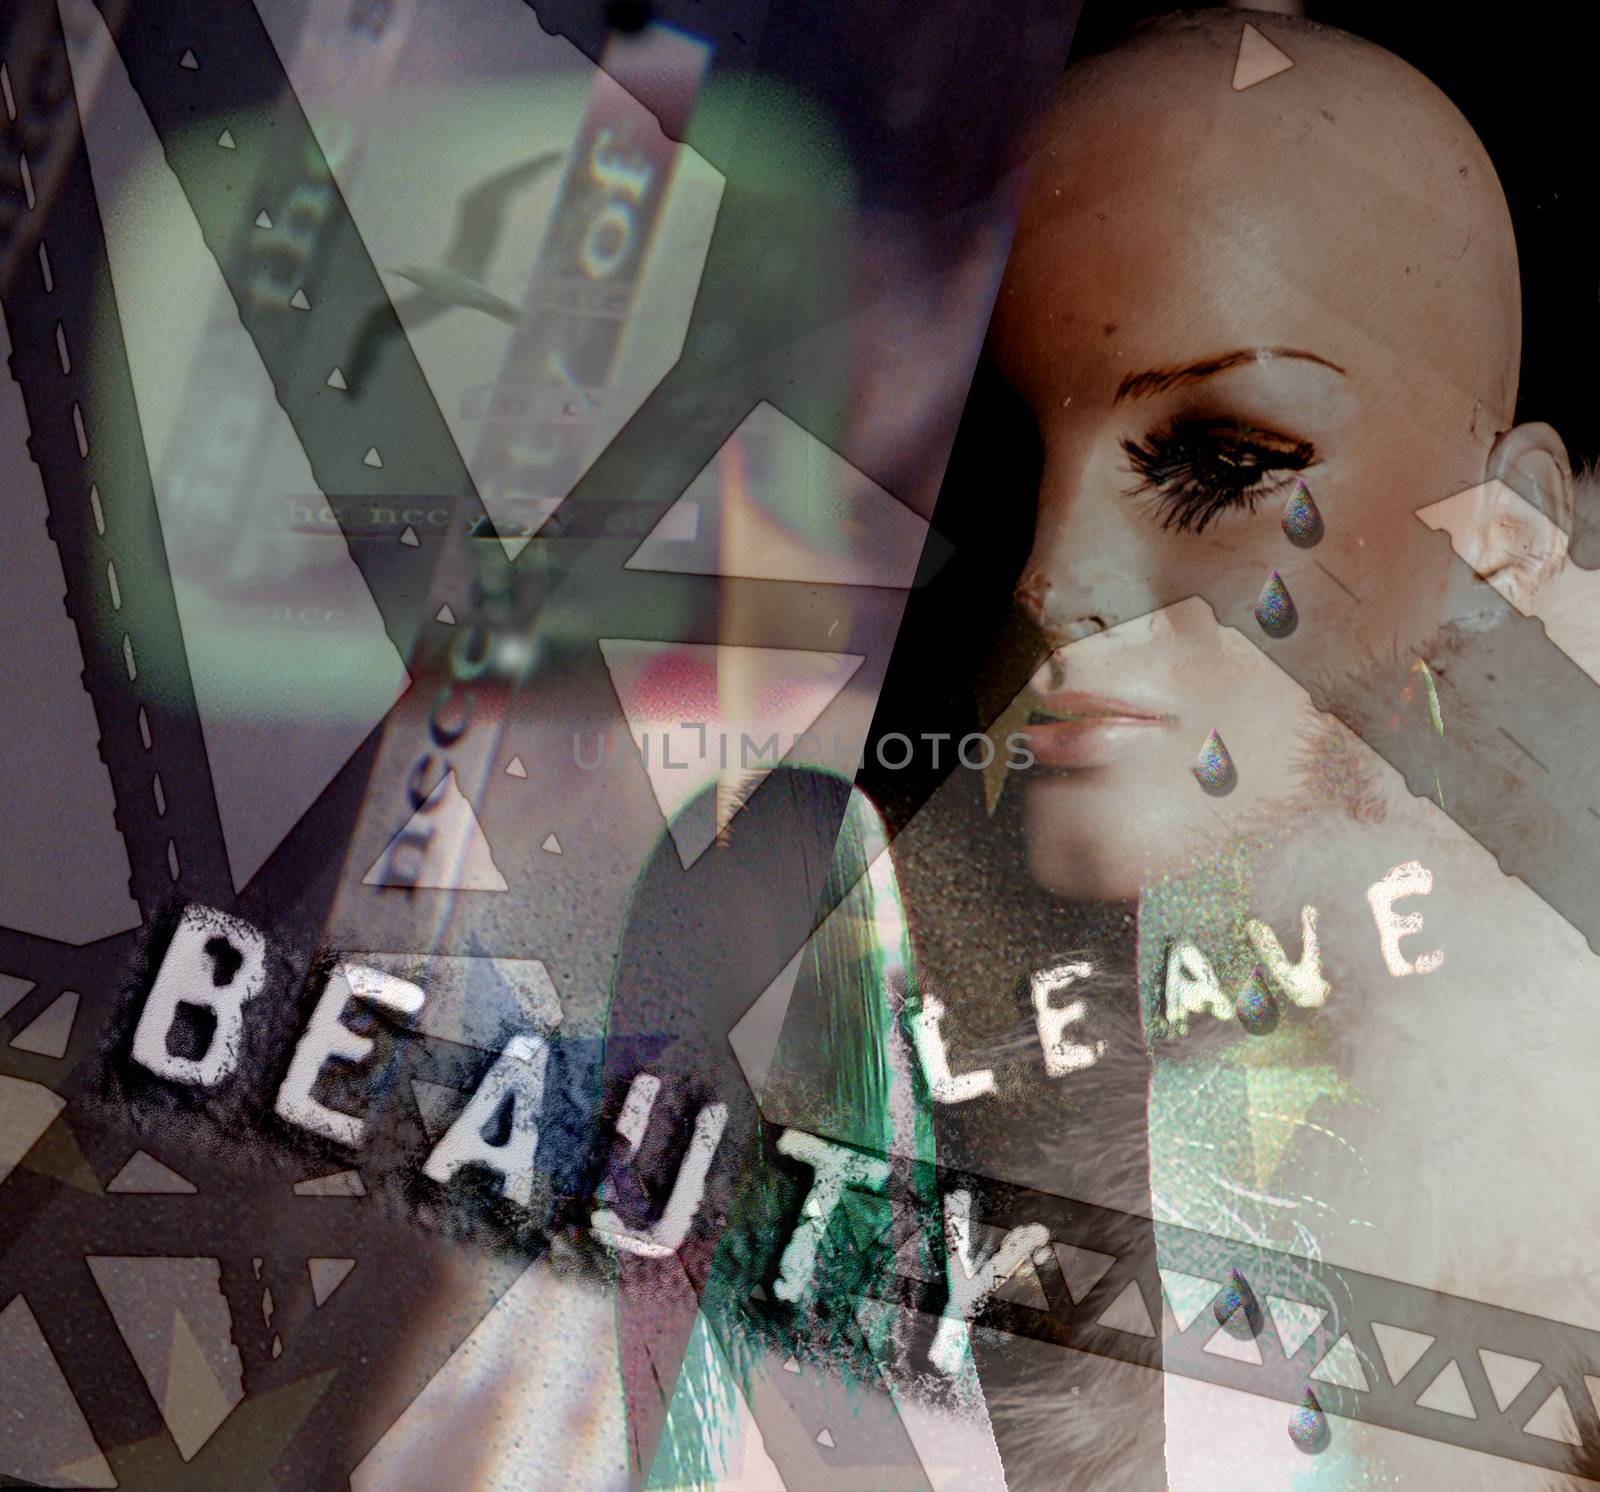 Leave the Beauty by applesstock